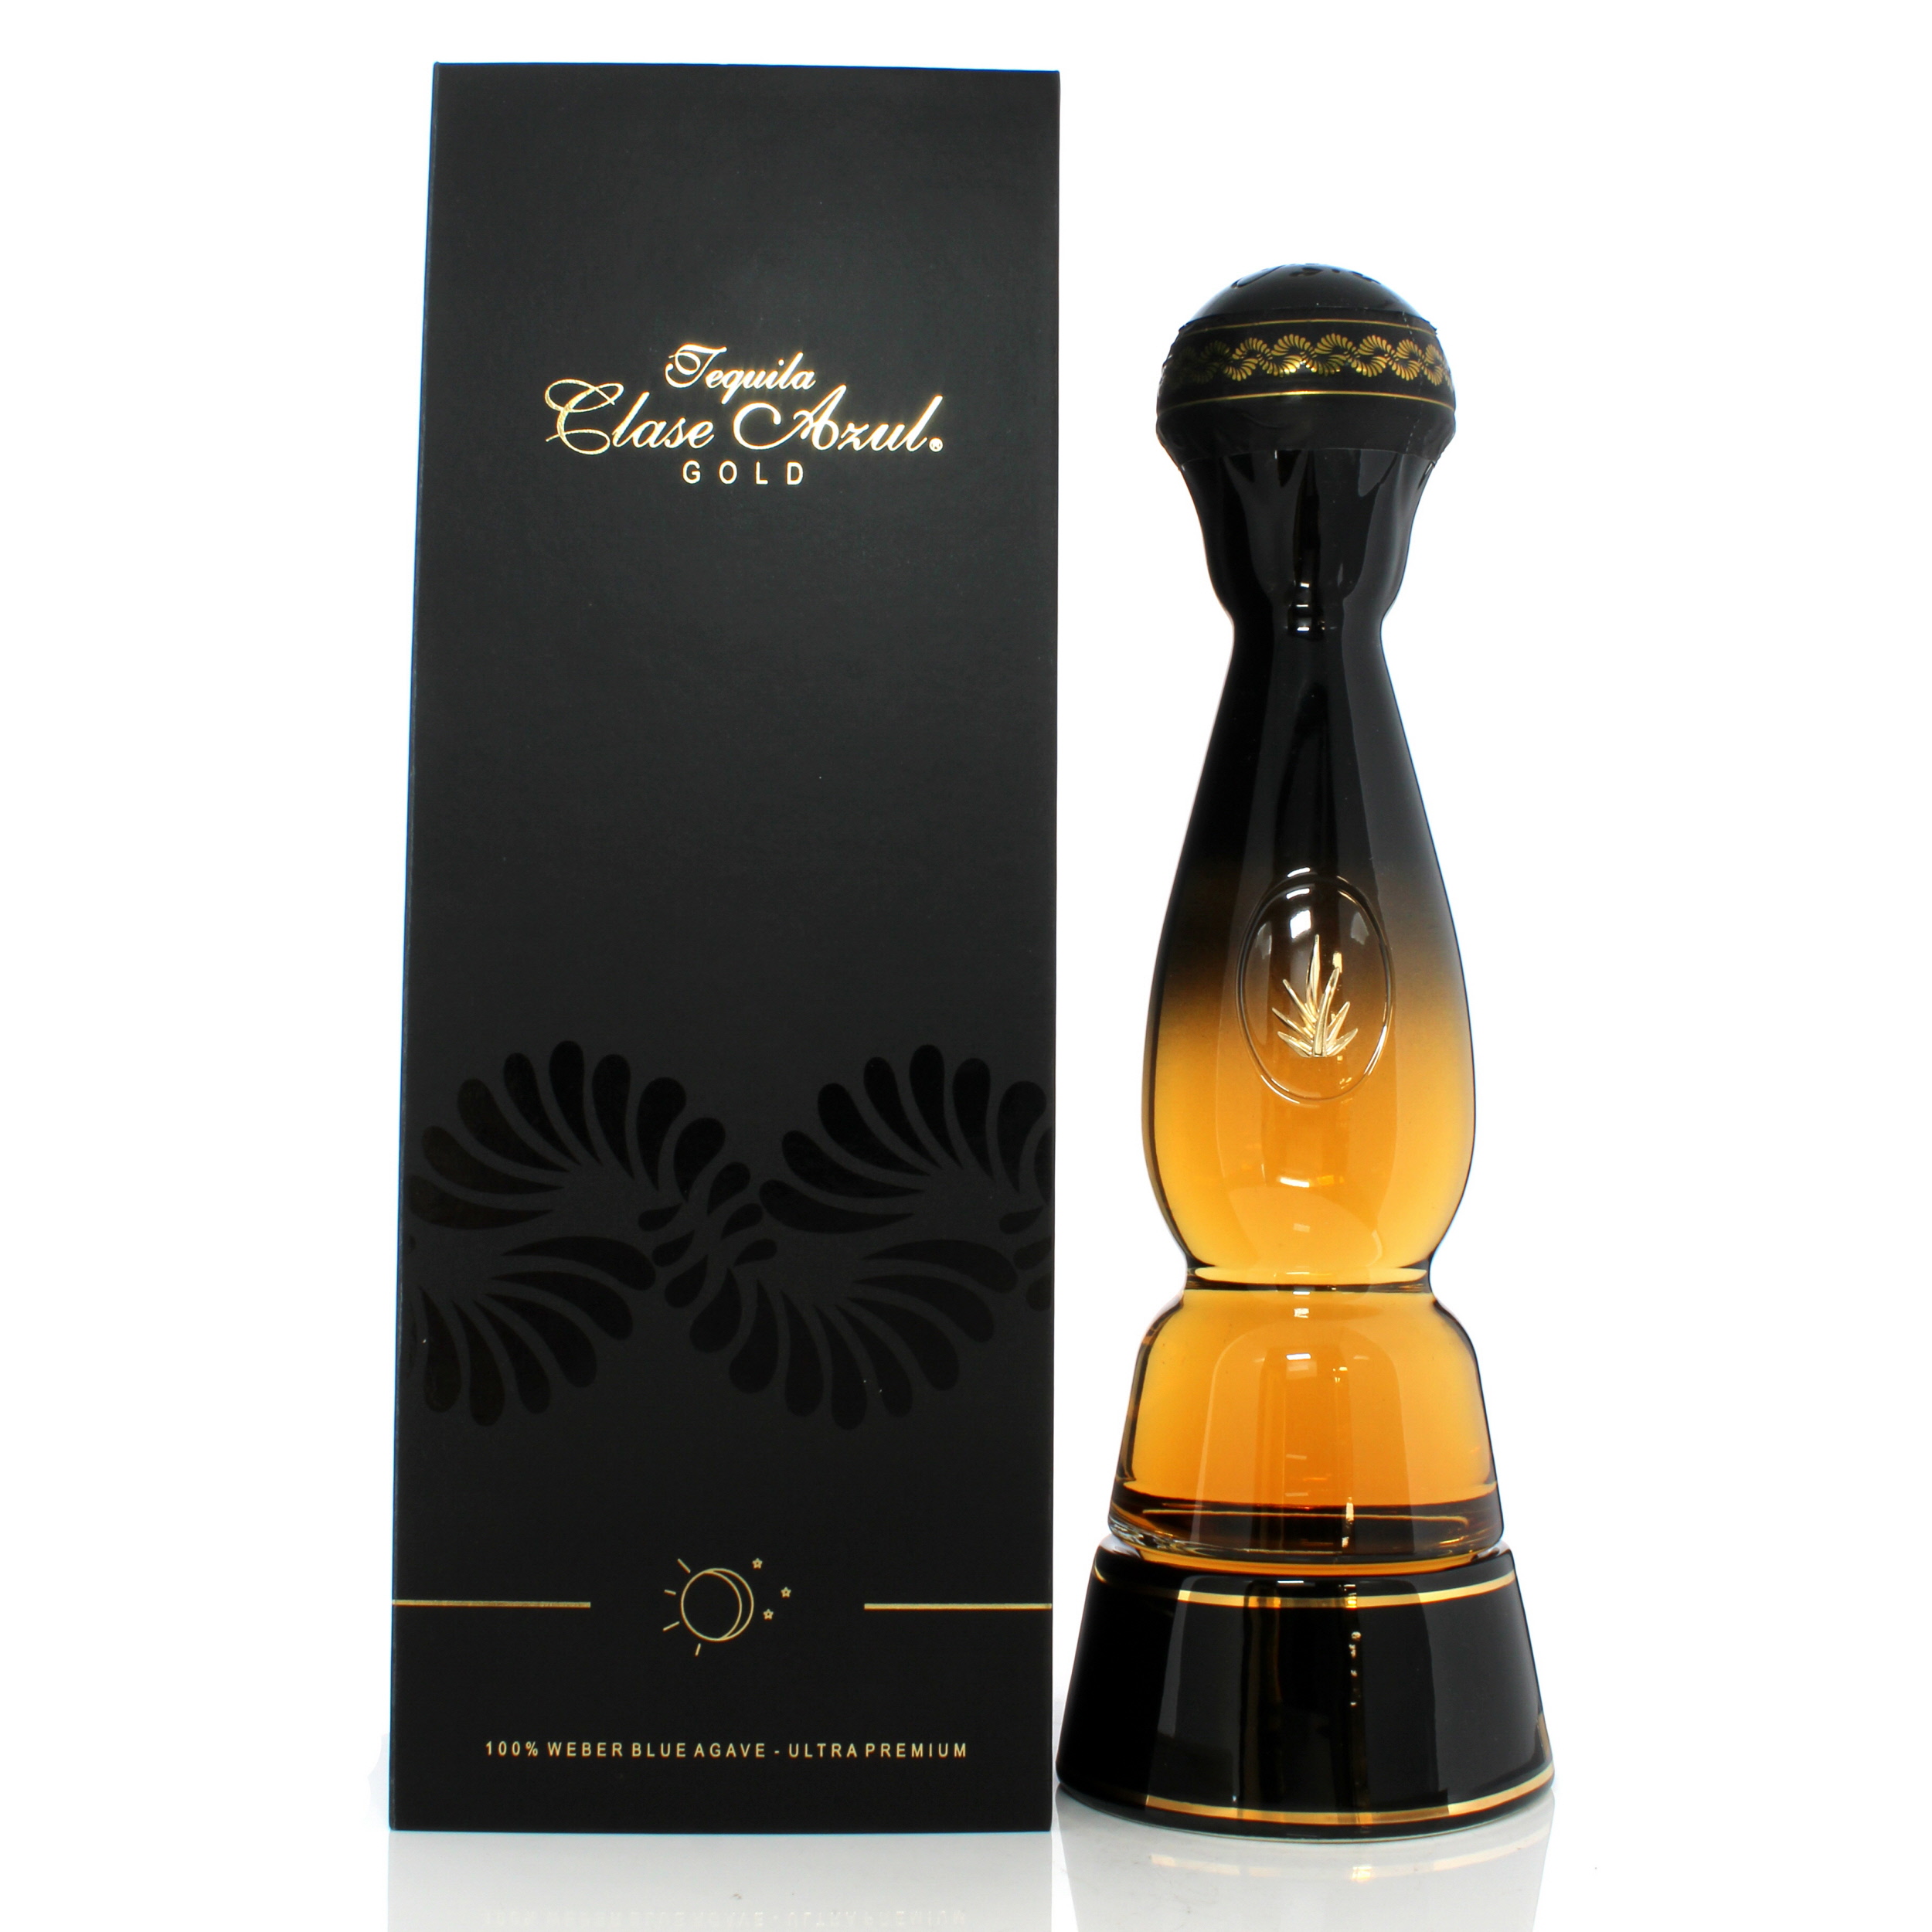 Clase Azul Gold Tequila Auction A53597 The Whisky Shop Auctions